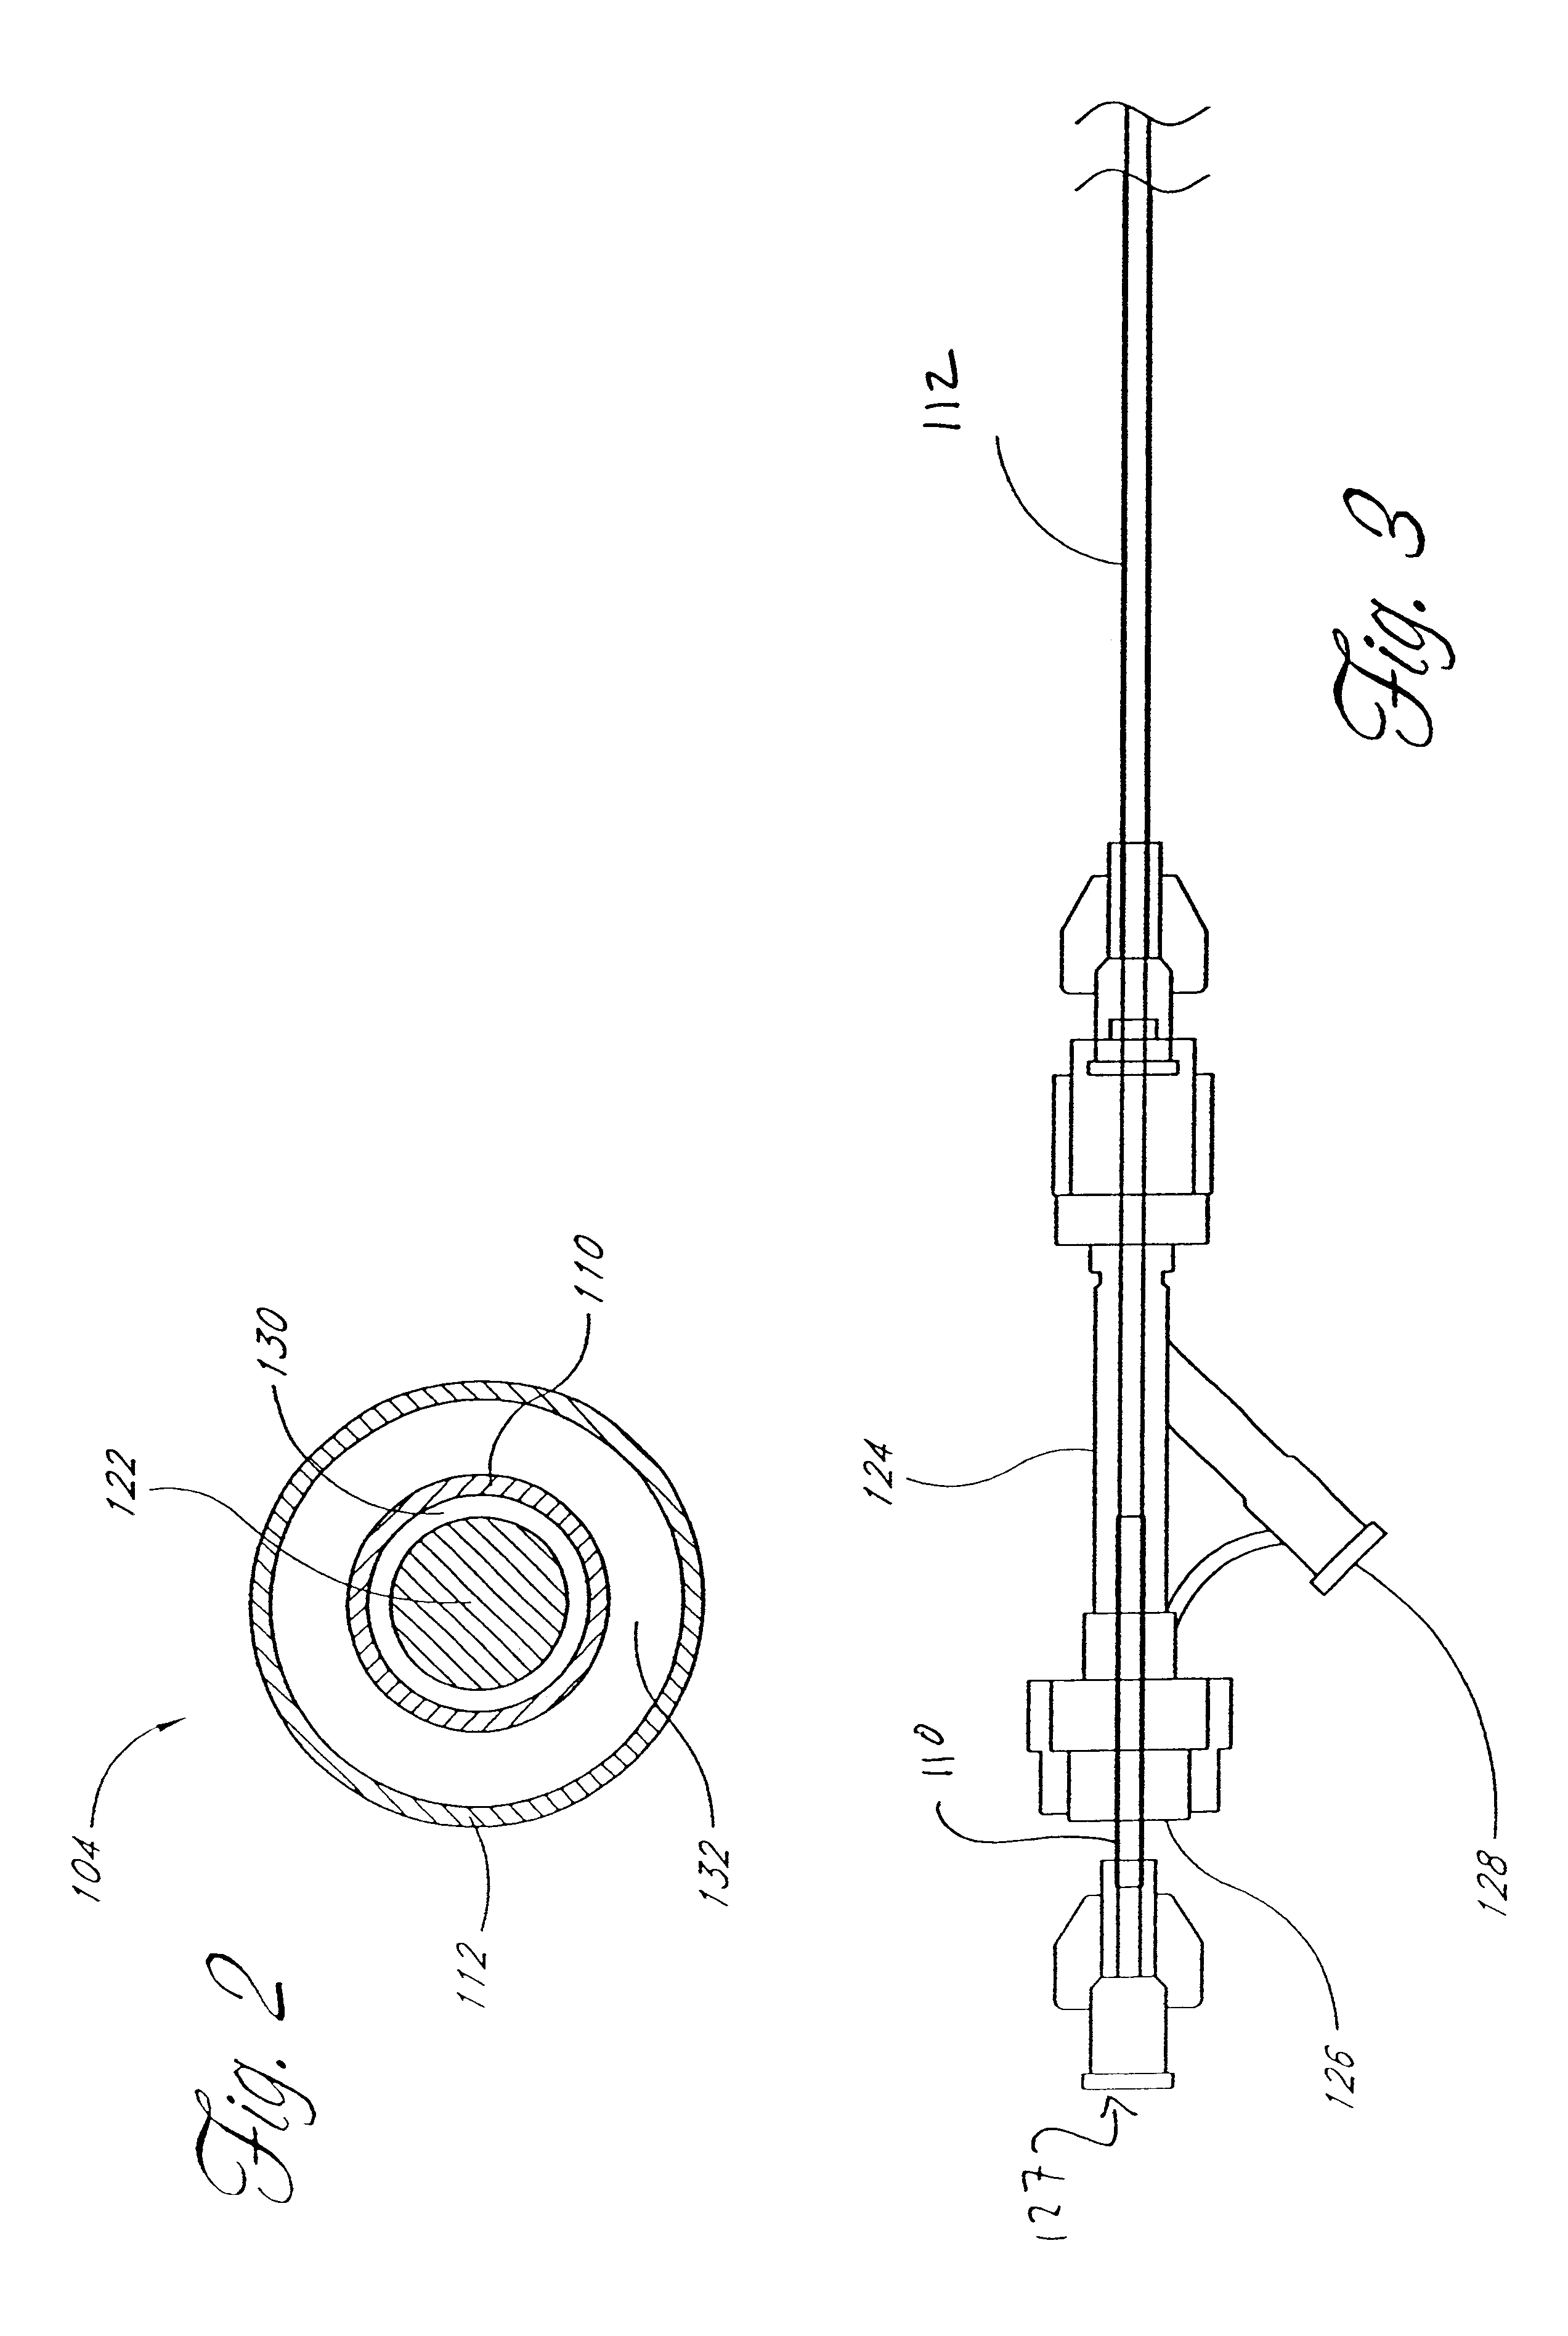 Formable orthopedic fixation system